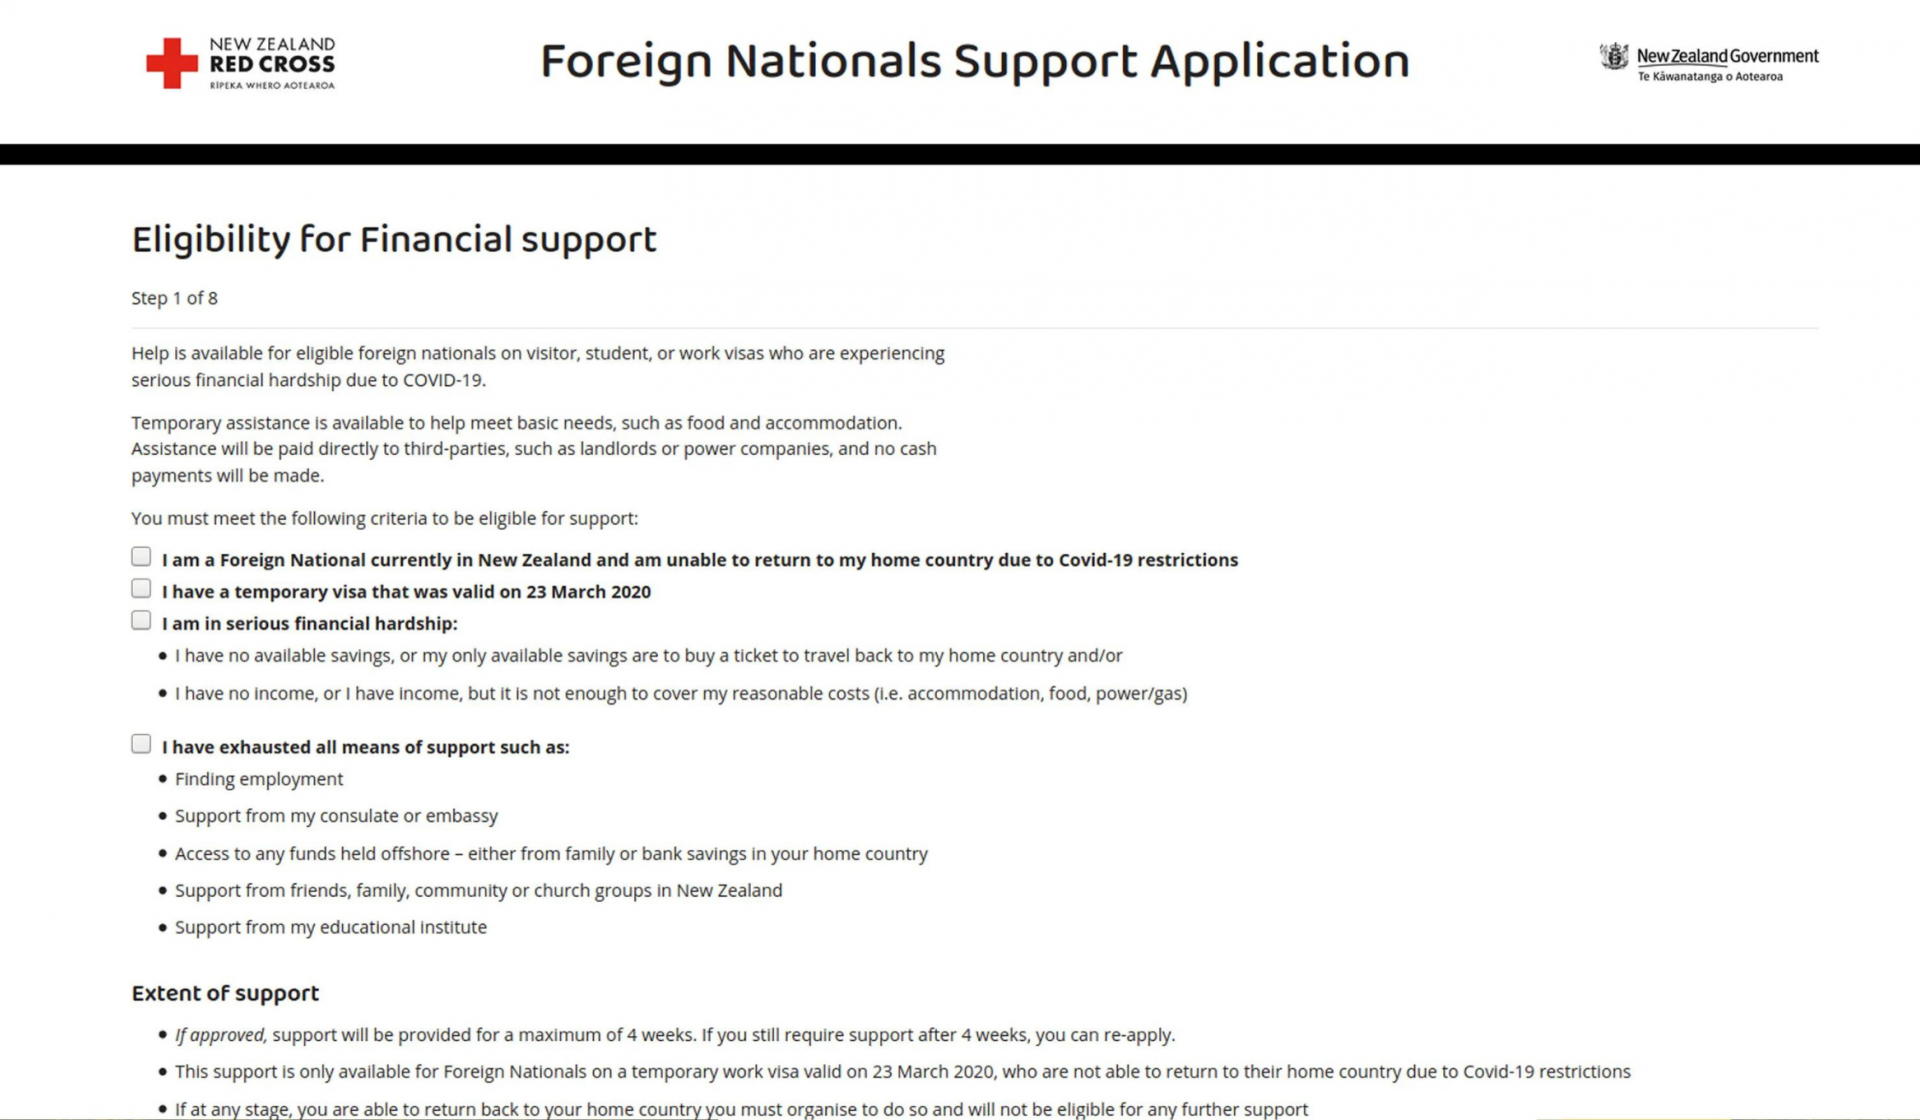 Screenshot of the New Zealand Red Cross website on the Foreign Nationals Support Application